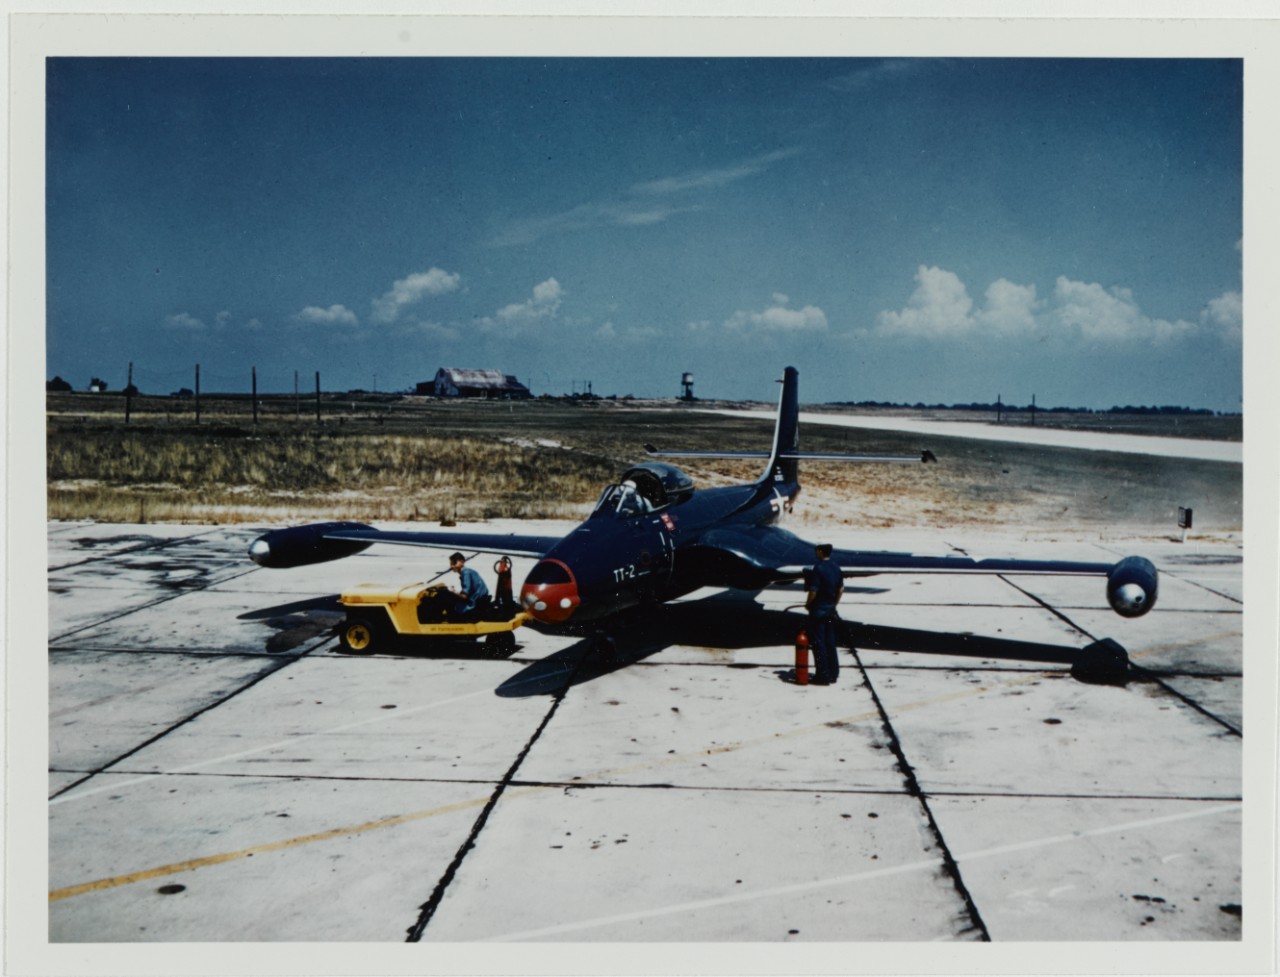 McDonnell F2H-2 "BANSHEE" at Naval Air Test Center, Patuxent River, Maryland, circa 1950s